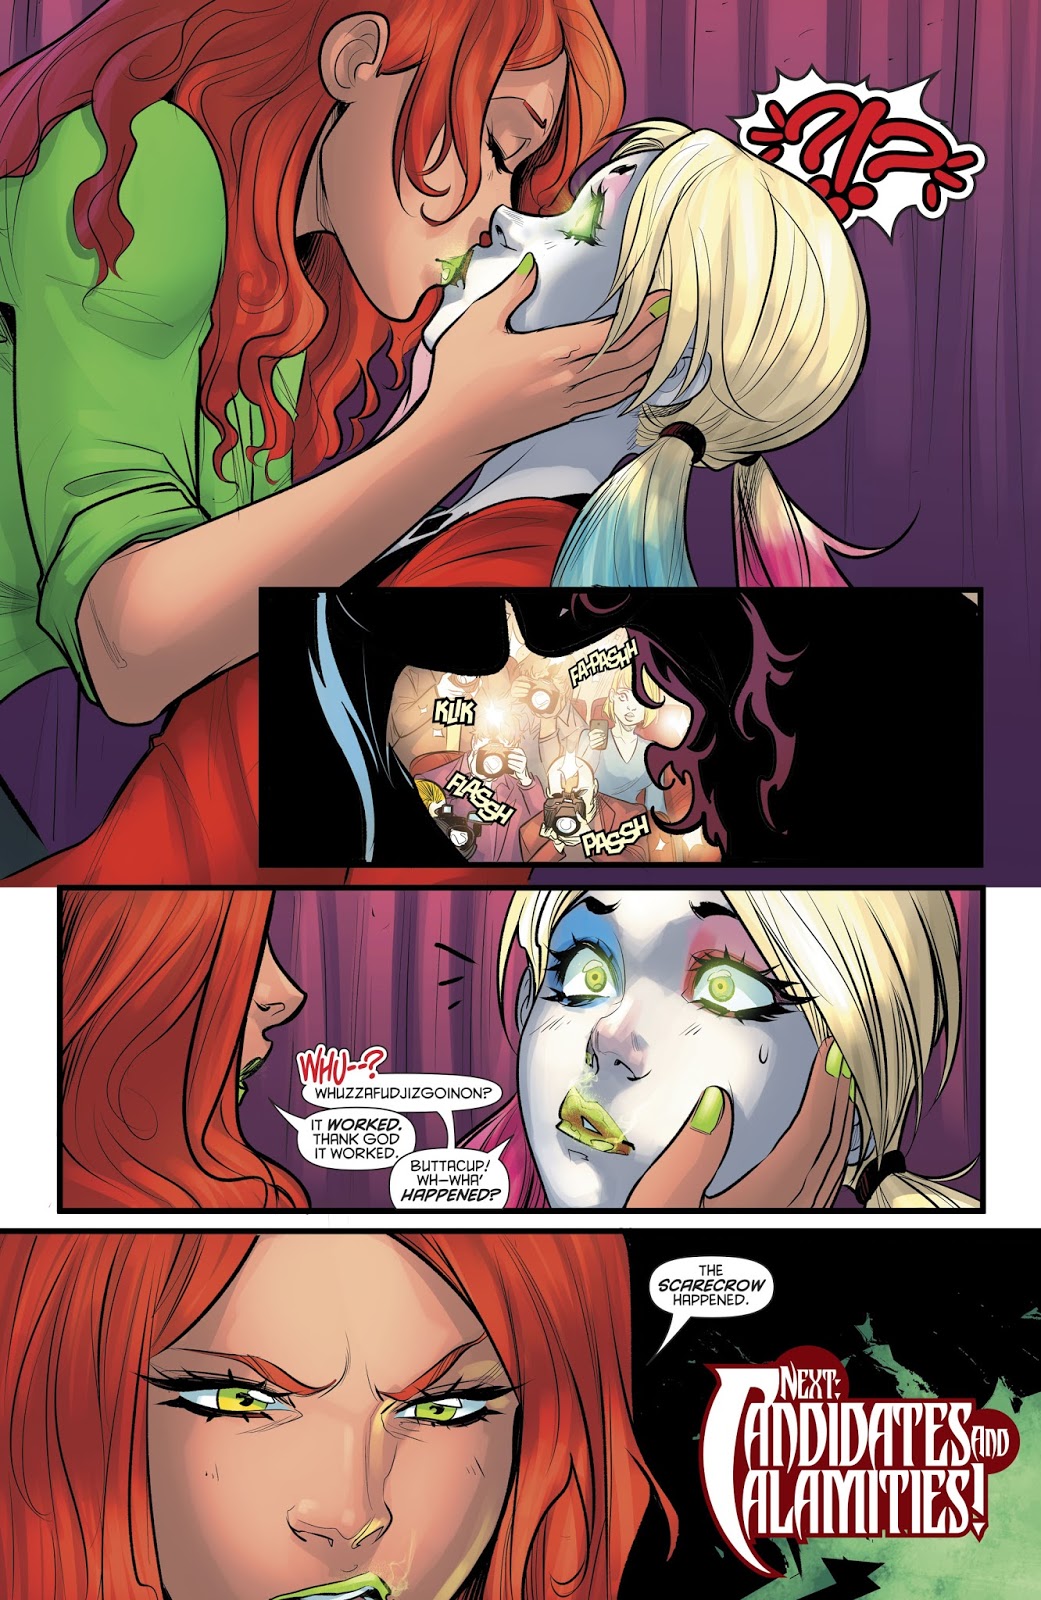 How Poison Ivy Saved Harley Quinn From Fear Gas